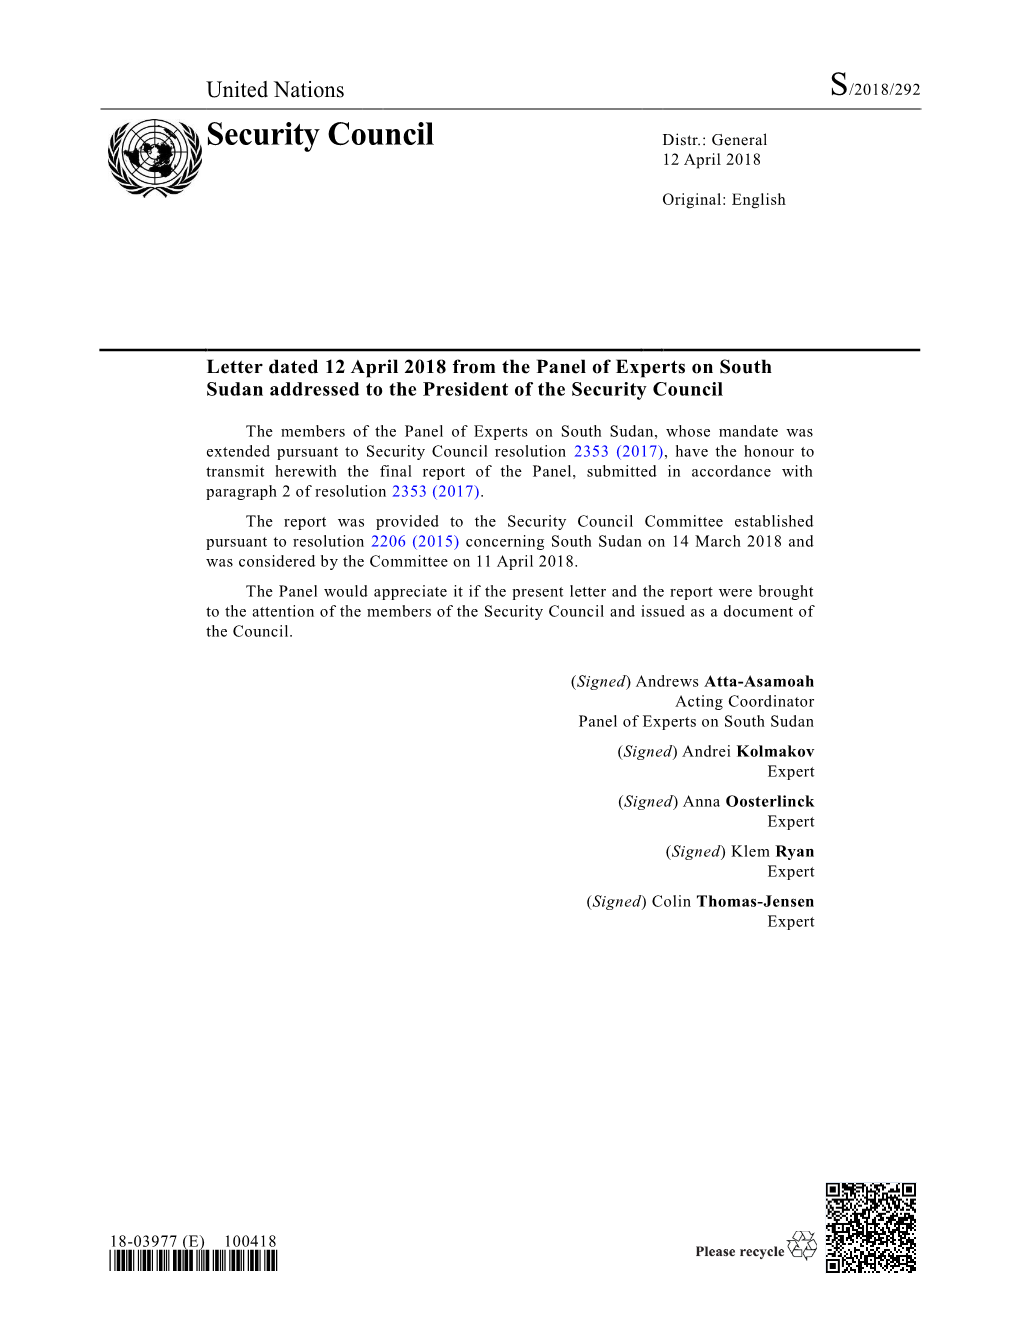 South Sudan Addressed to the President of the Security Council